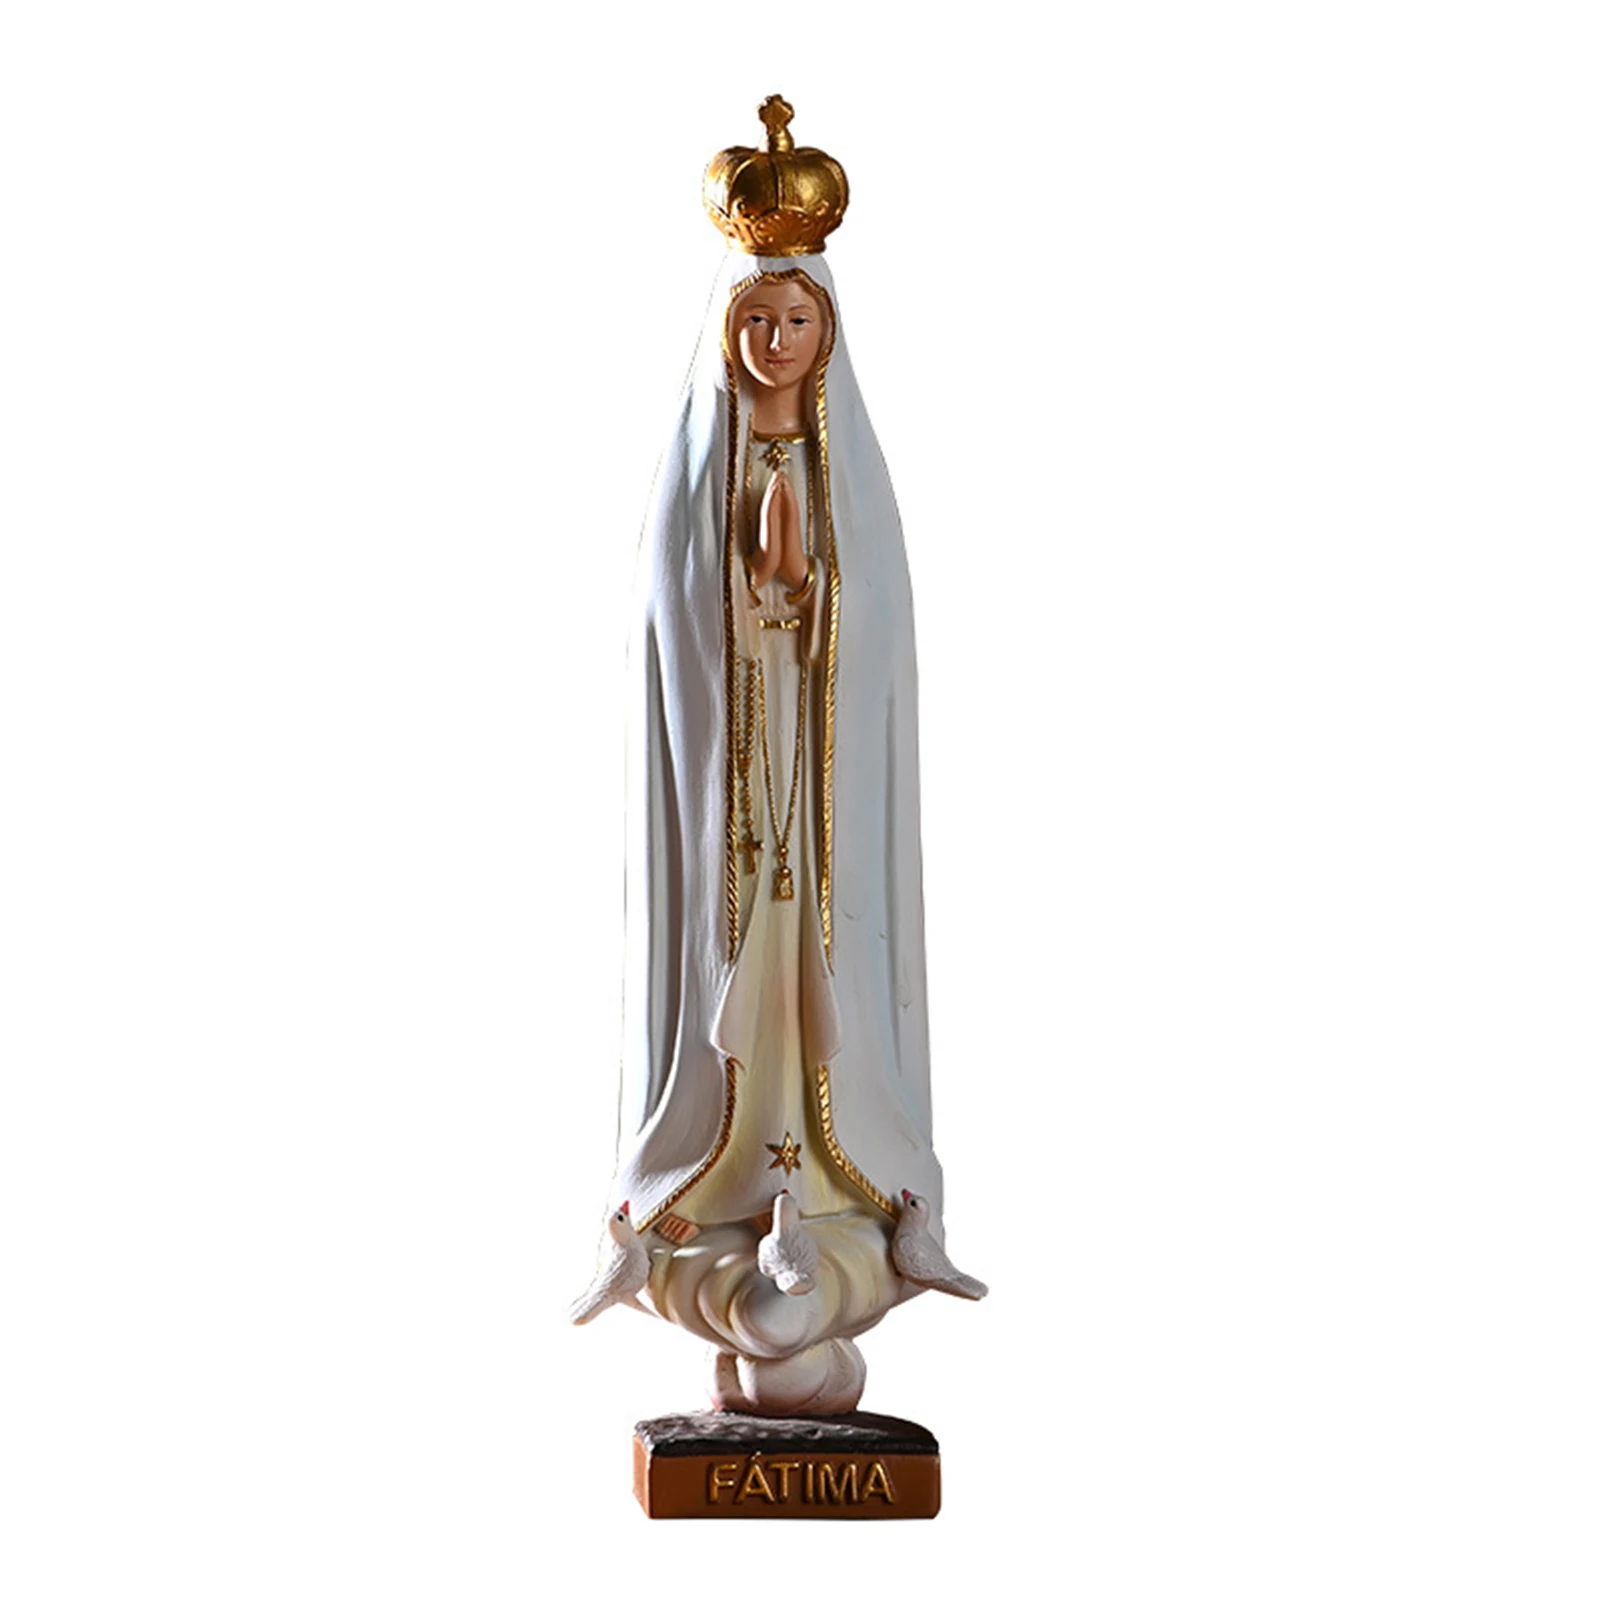 

European Style Our Lady Of Fatima Statue Figure Ornaments Religious Church Resin Crafts Household Collectible Tabletop Decor